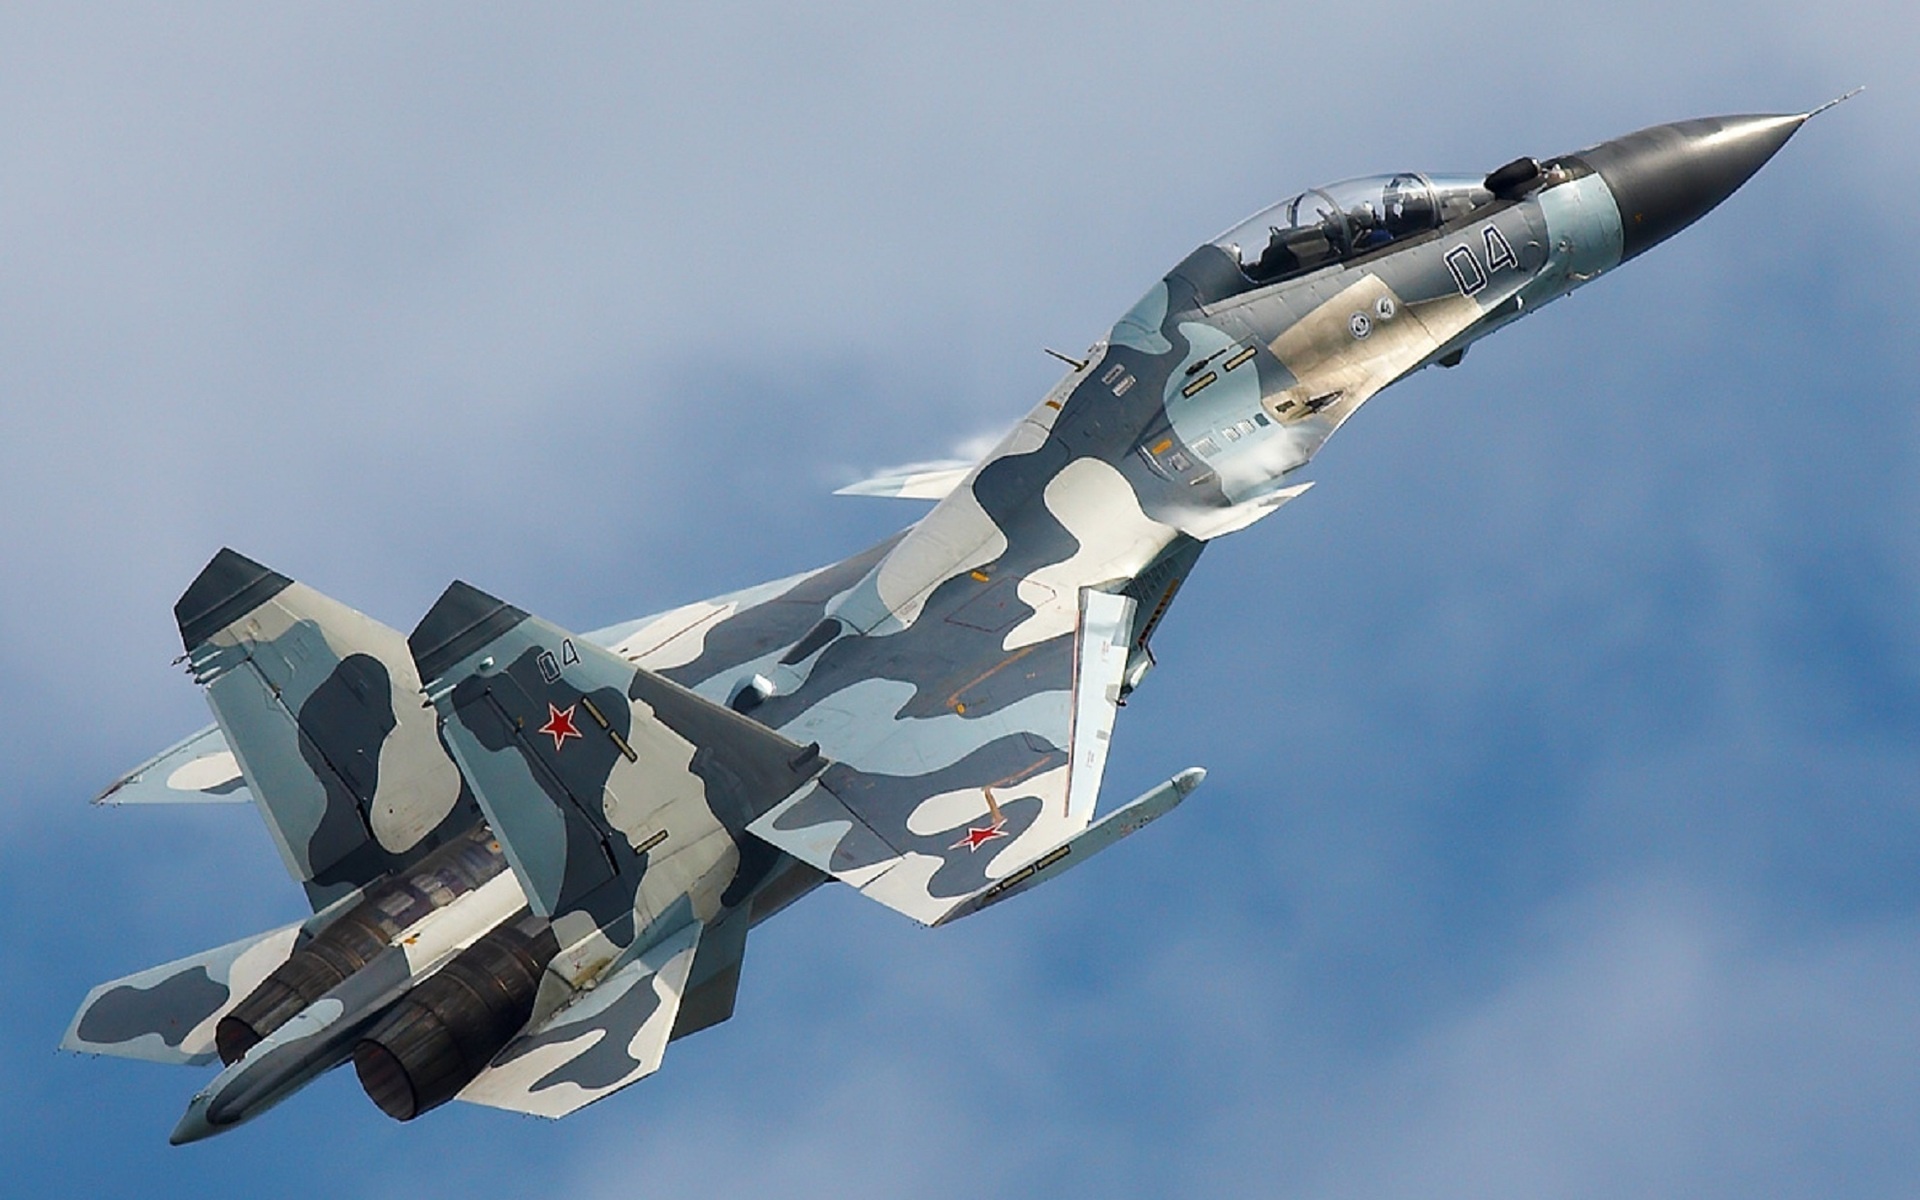  Next Big Weapons Sale Is the Lethal Su 30 Fighter Iran Bound